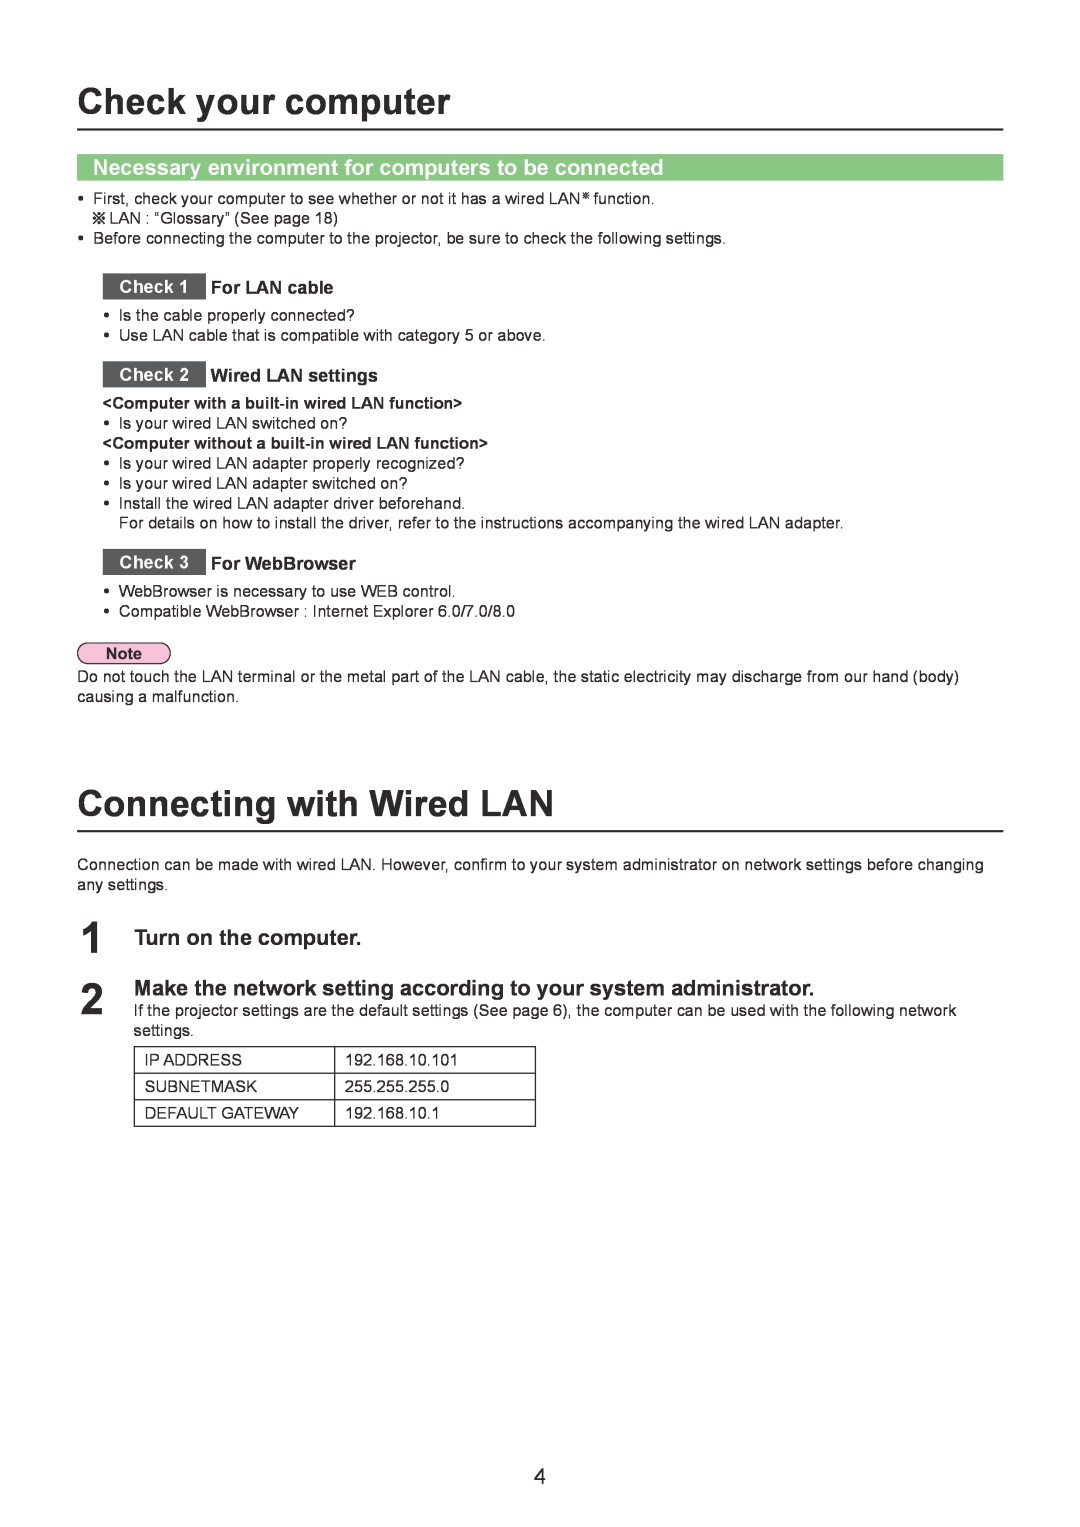 Panasonic TQBH0228 Check your computer, Connecting with Wired LAN, Necessary environment for computers to be connected 